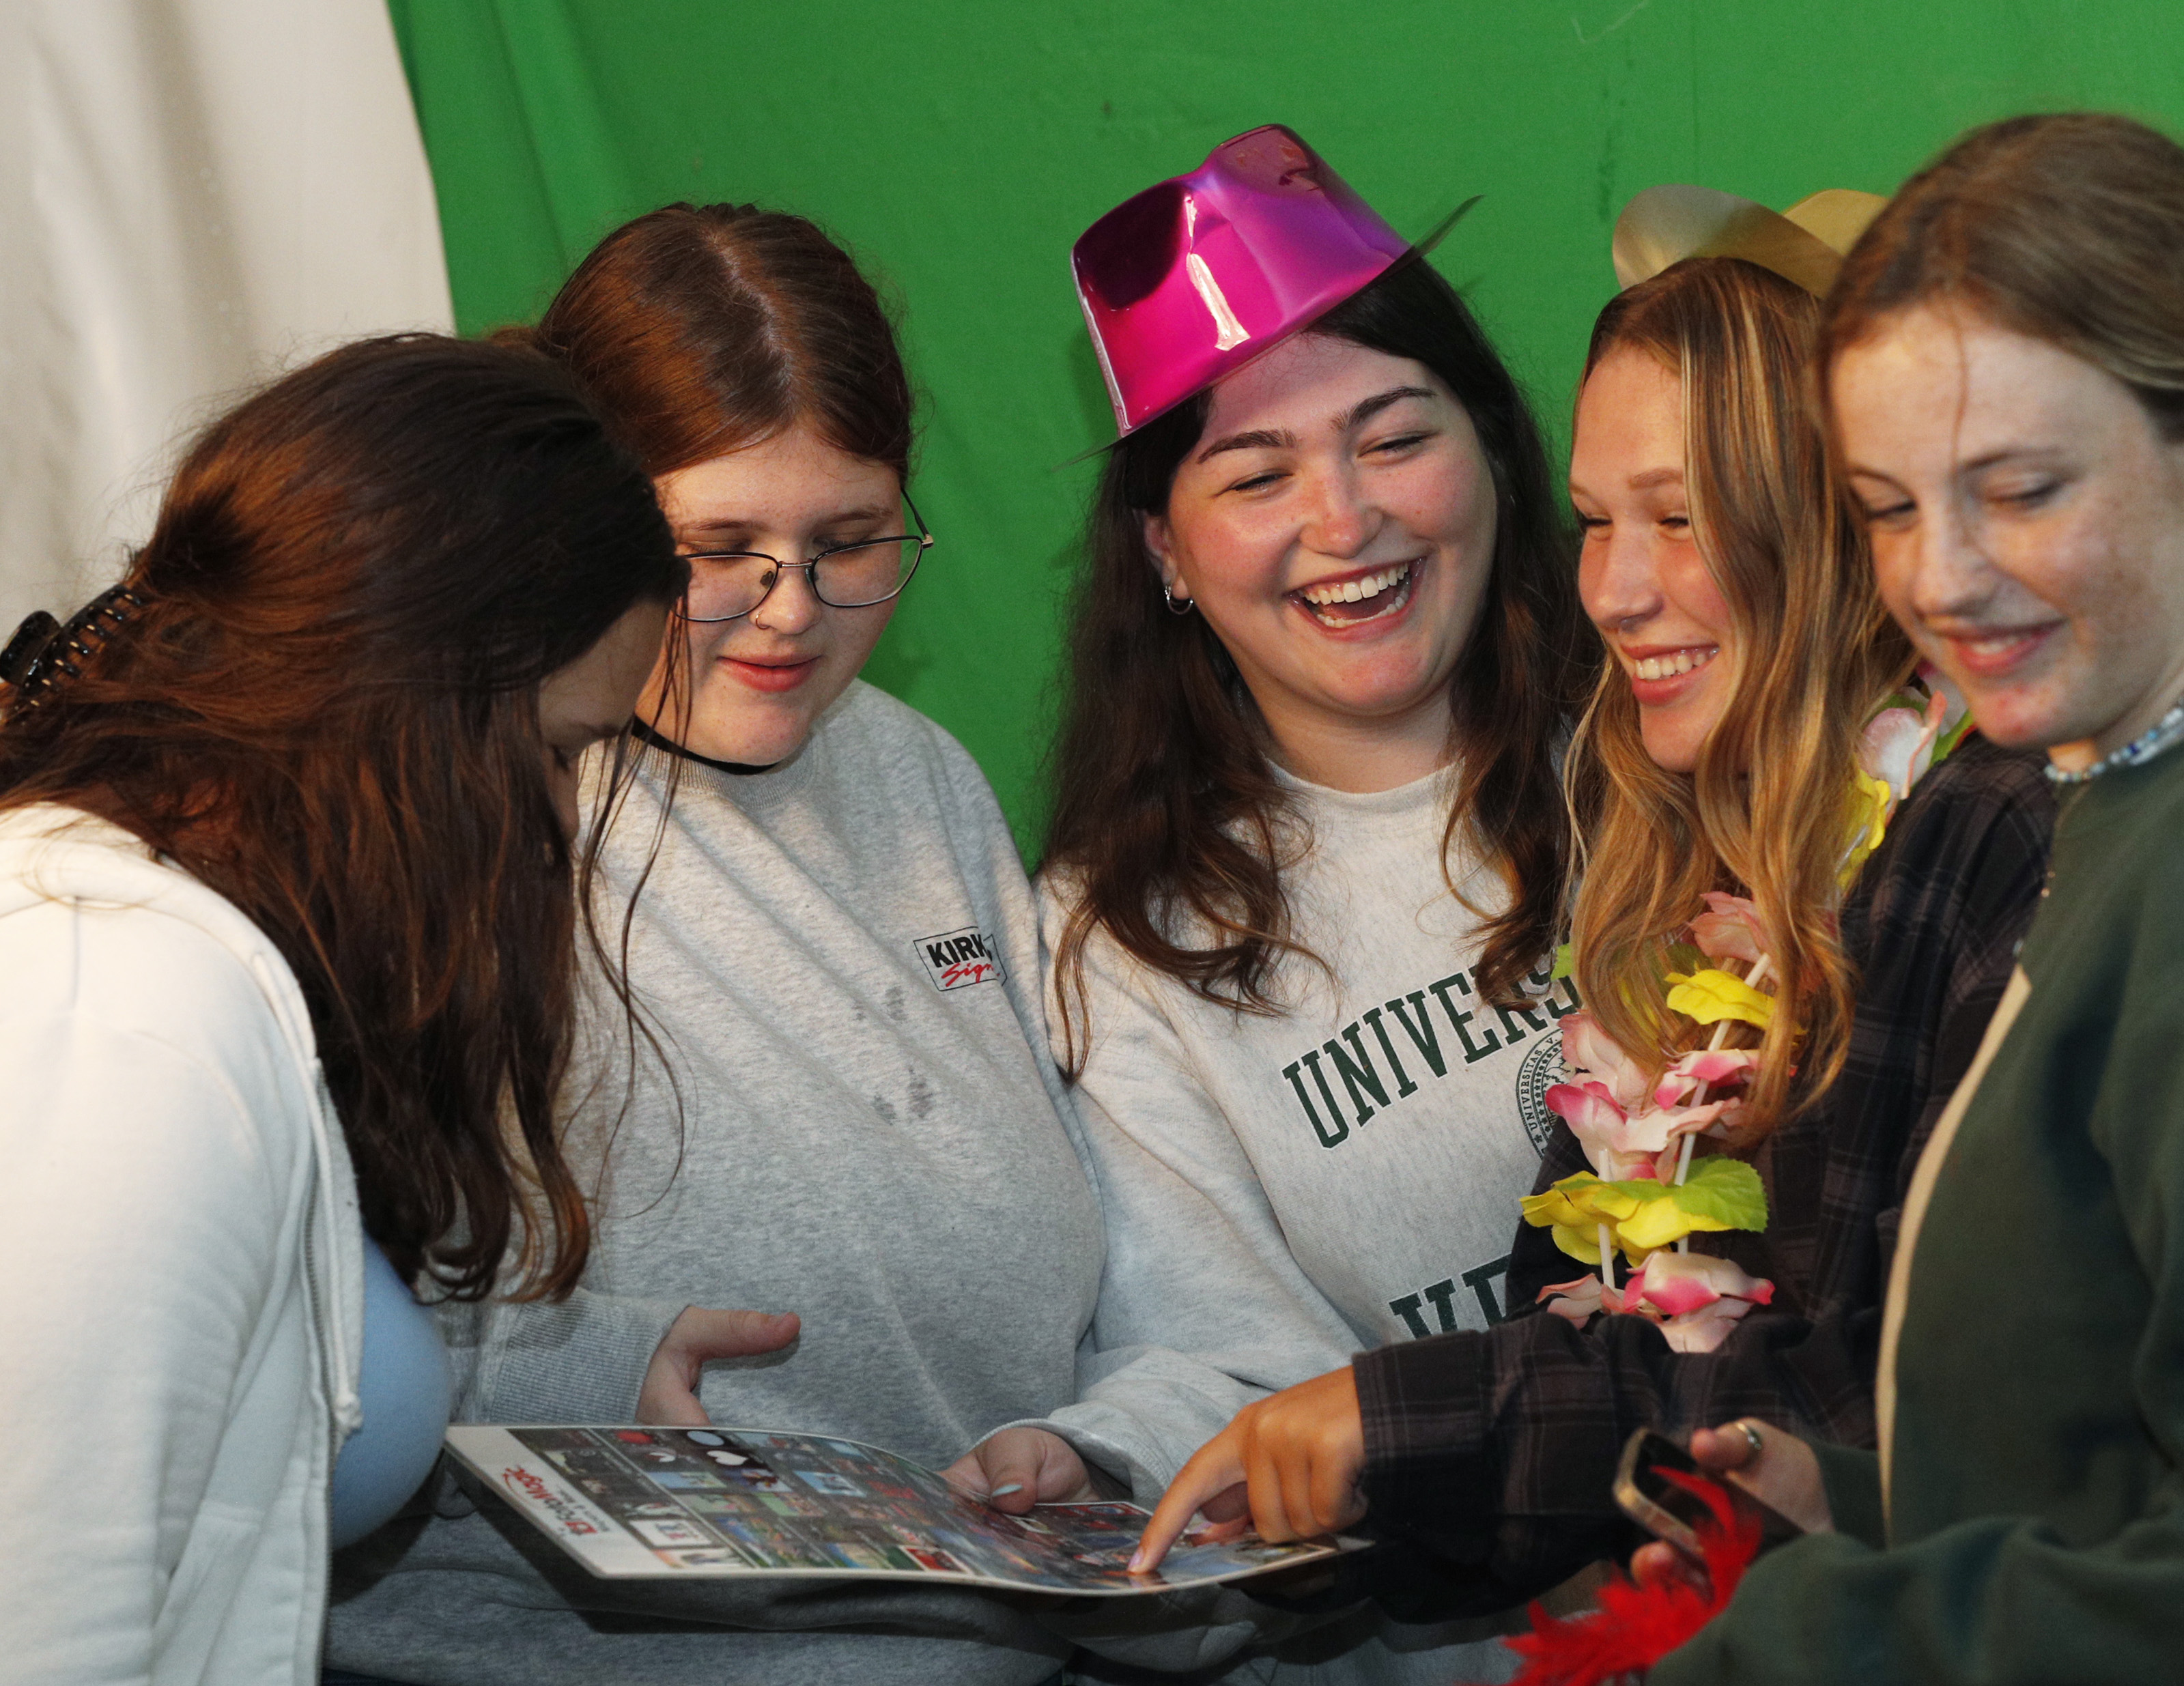 Skidmore students take photos in a photo booth during Founder's Day.